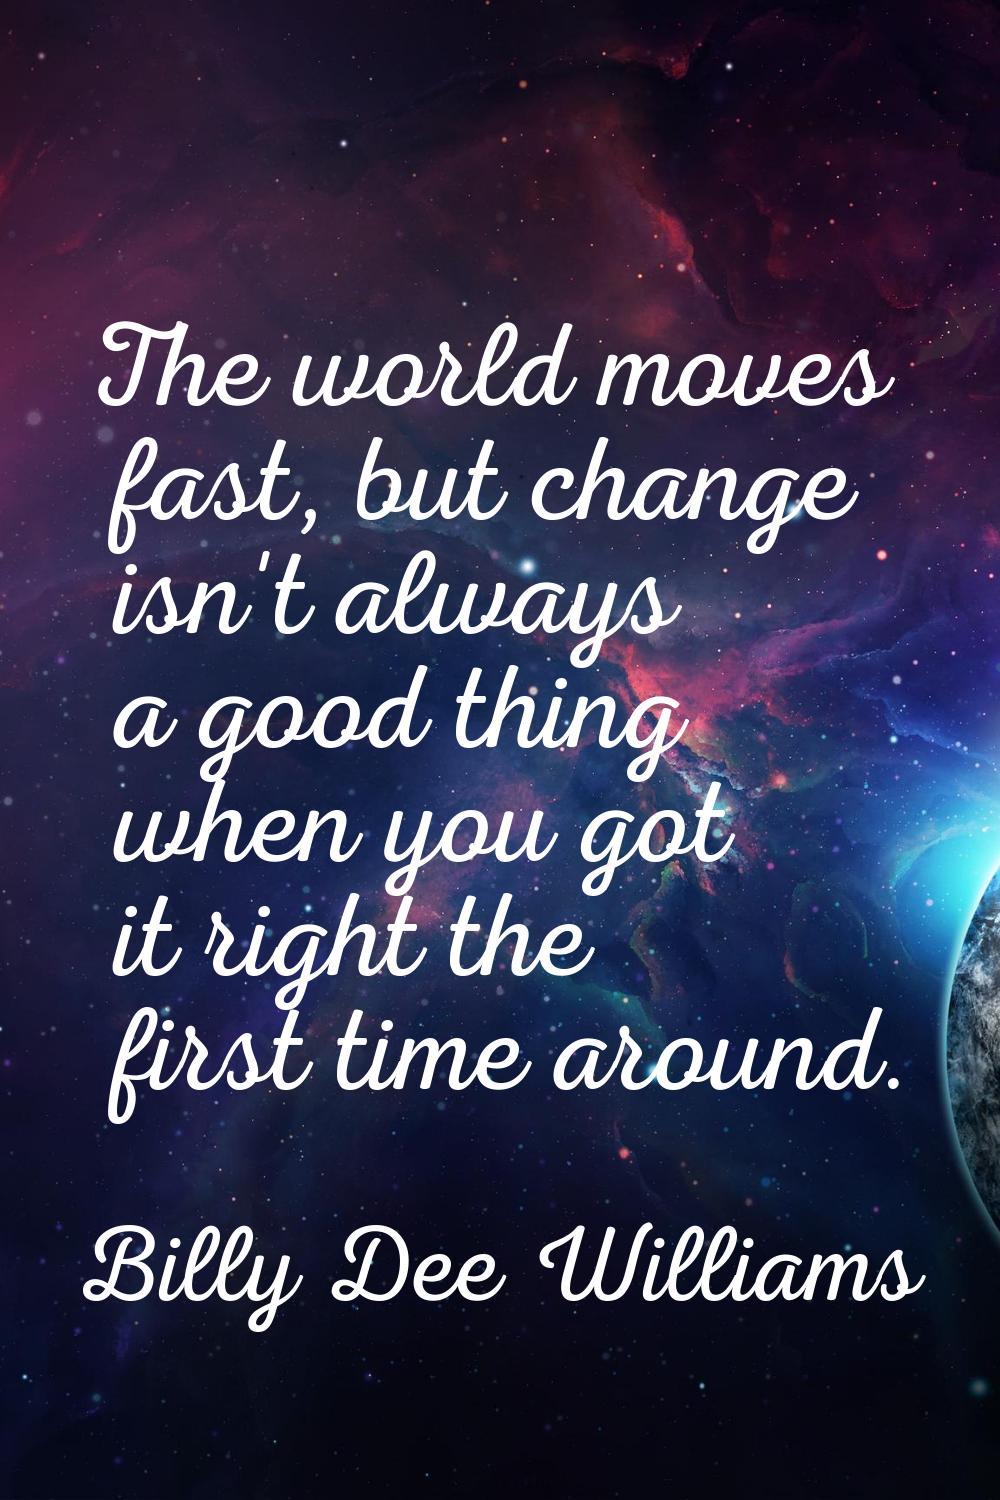 The world moves fast, but change isn't always a good thing when you got it right the first time aro